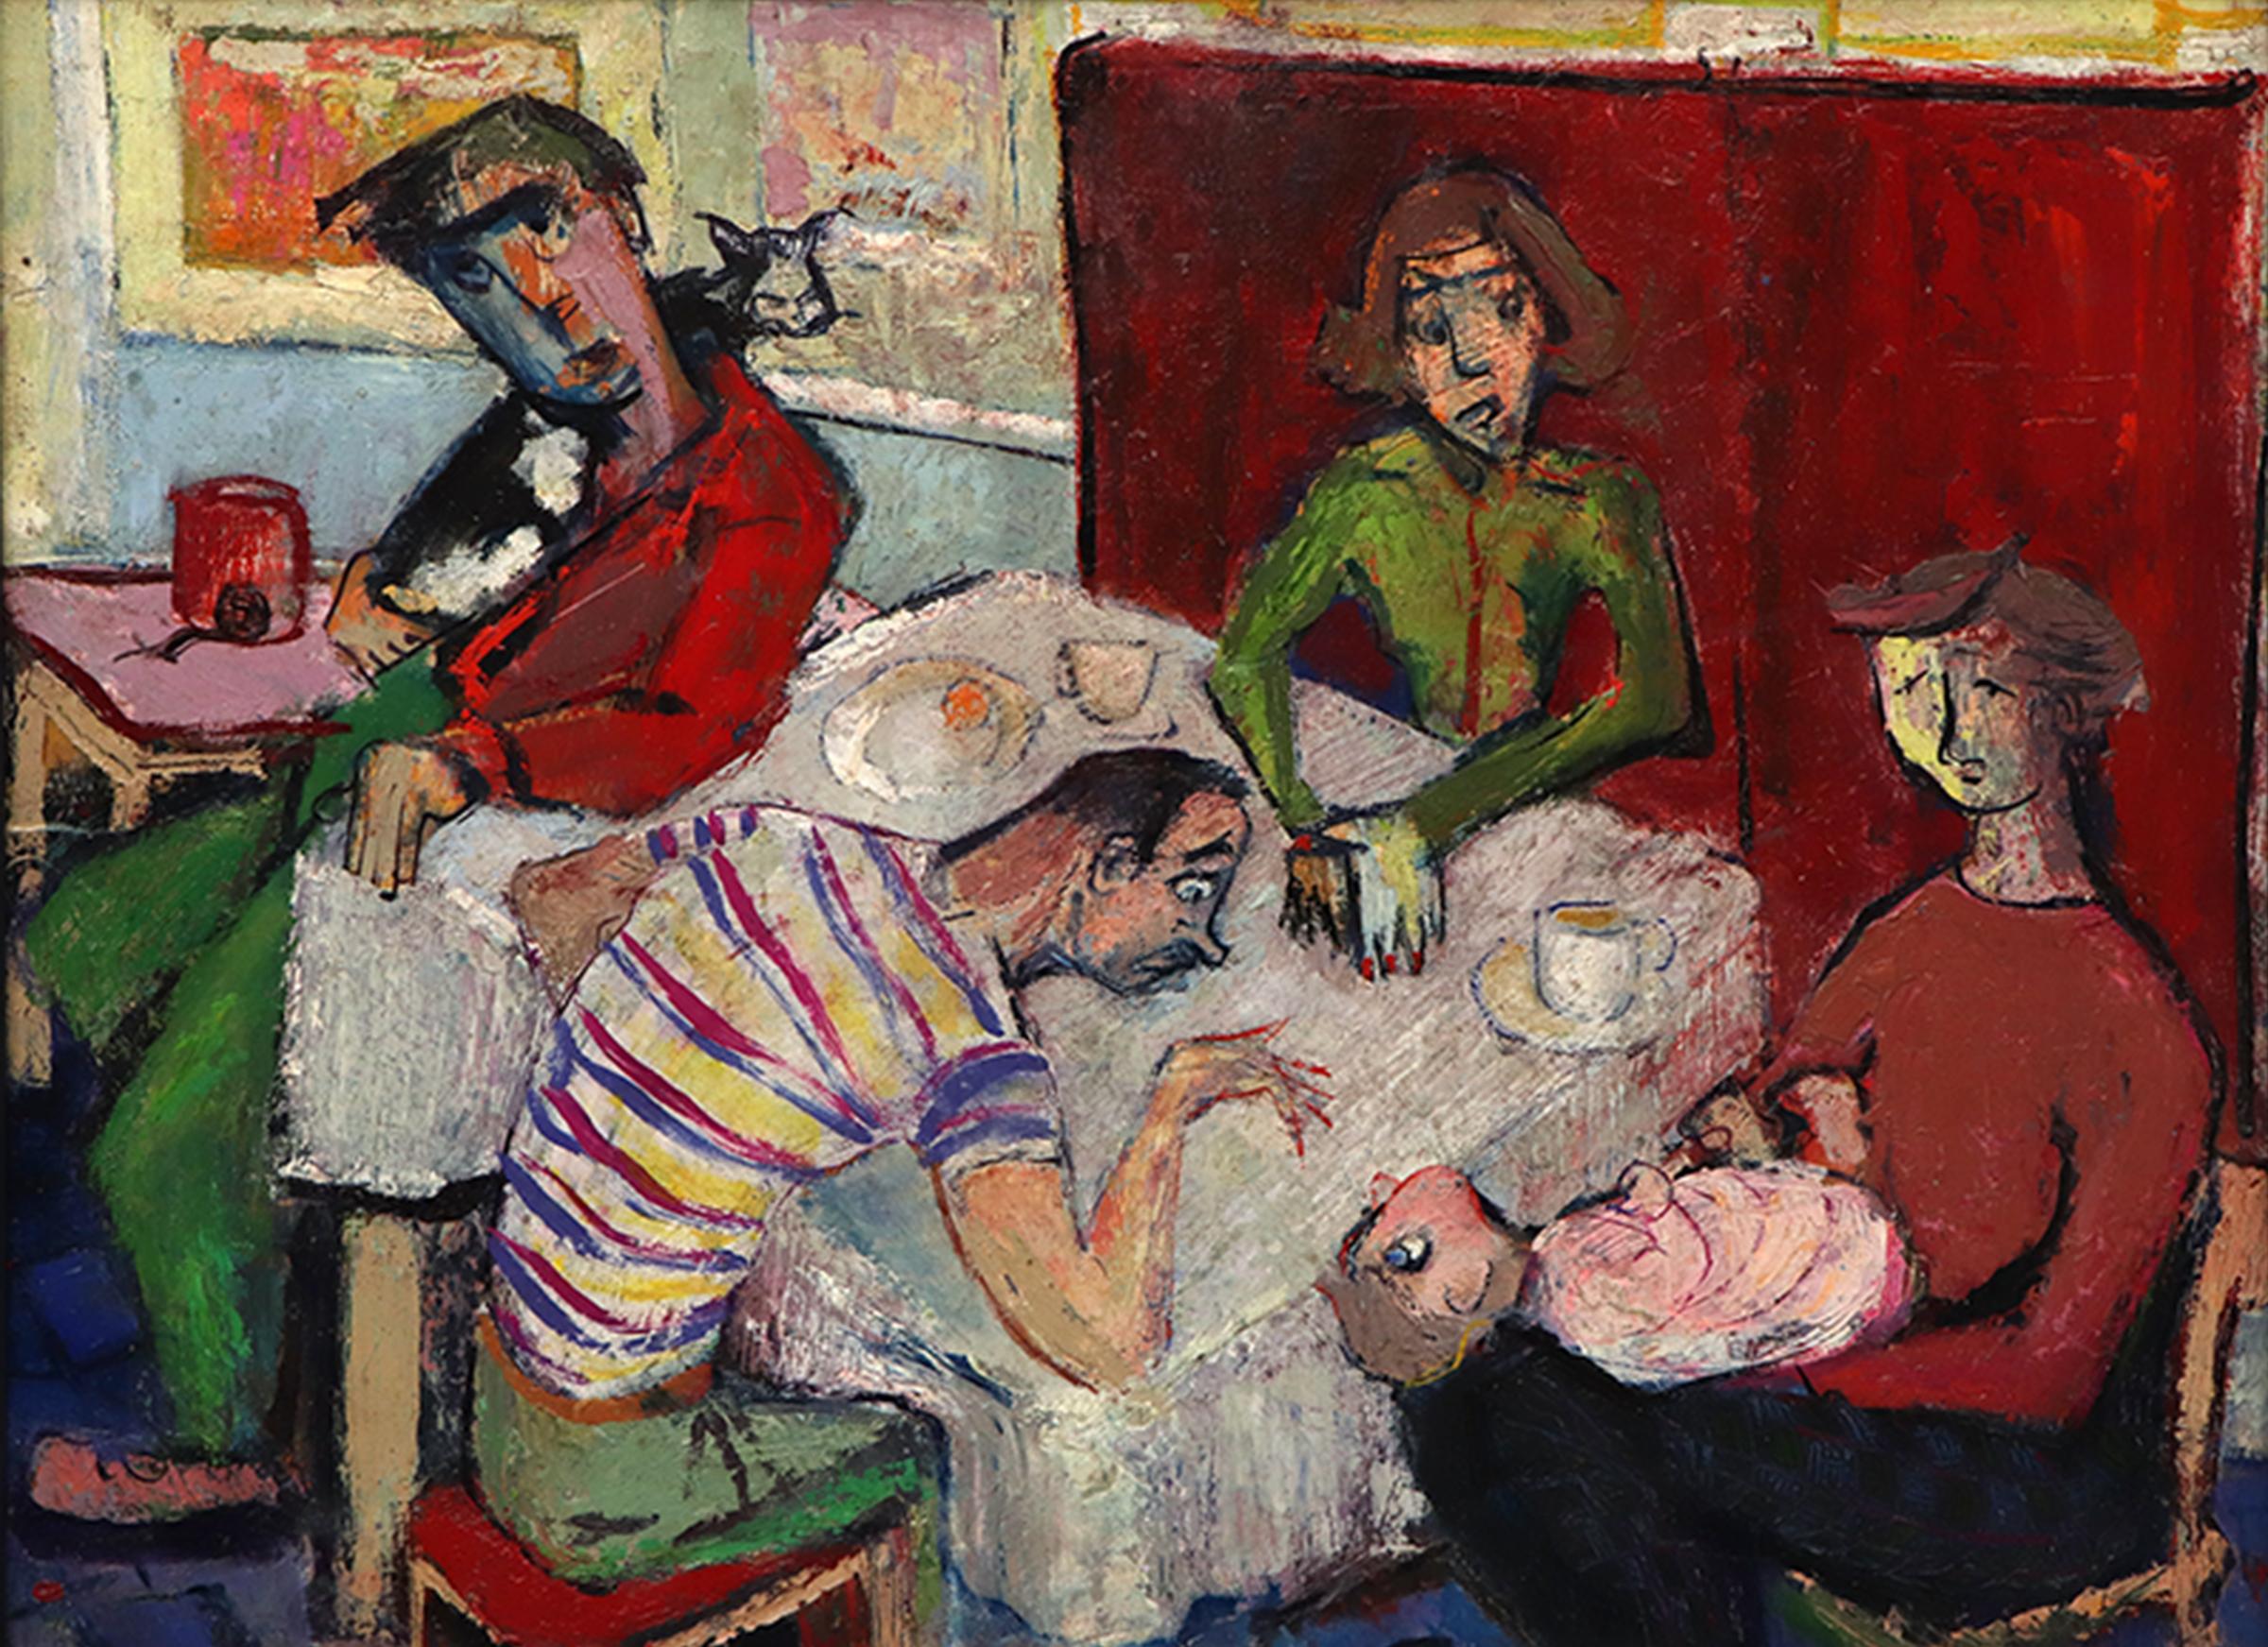 Oil on board painting by Donna Marecak (1922-1998) titled 'Artist and his Family' from 1950.  Interior scene with four figures, a baby, and a cat gathered around a table. Painted in shades of red, green, white, orange, brown, and yellow. 

Presented